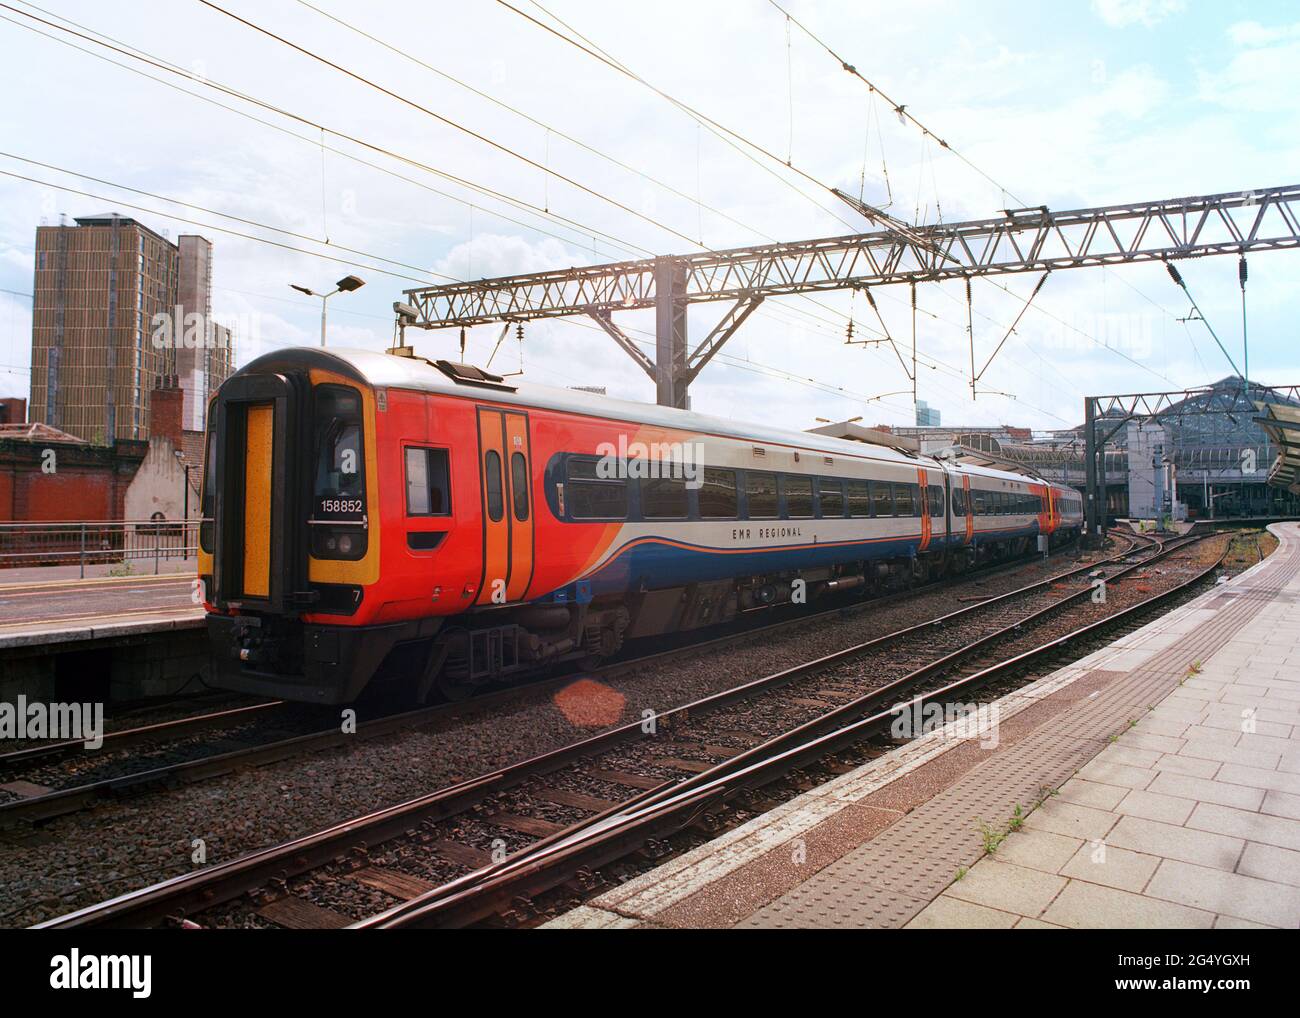 Manchester, UK - 19 June 2021: An express train (Class 158) operated by EMR (East Midlands Railway) at Manchester Piccadilly railway station. Stock Photo